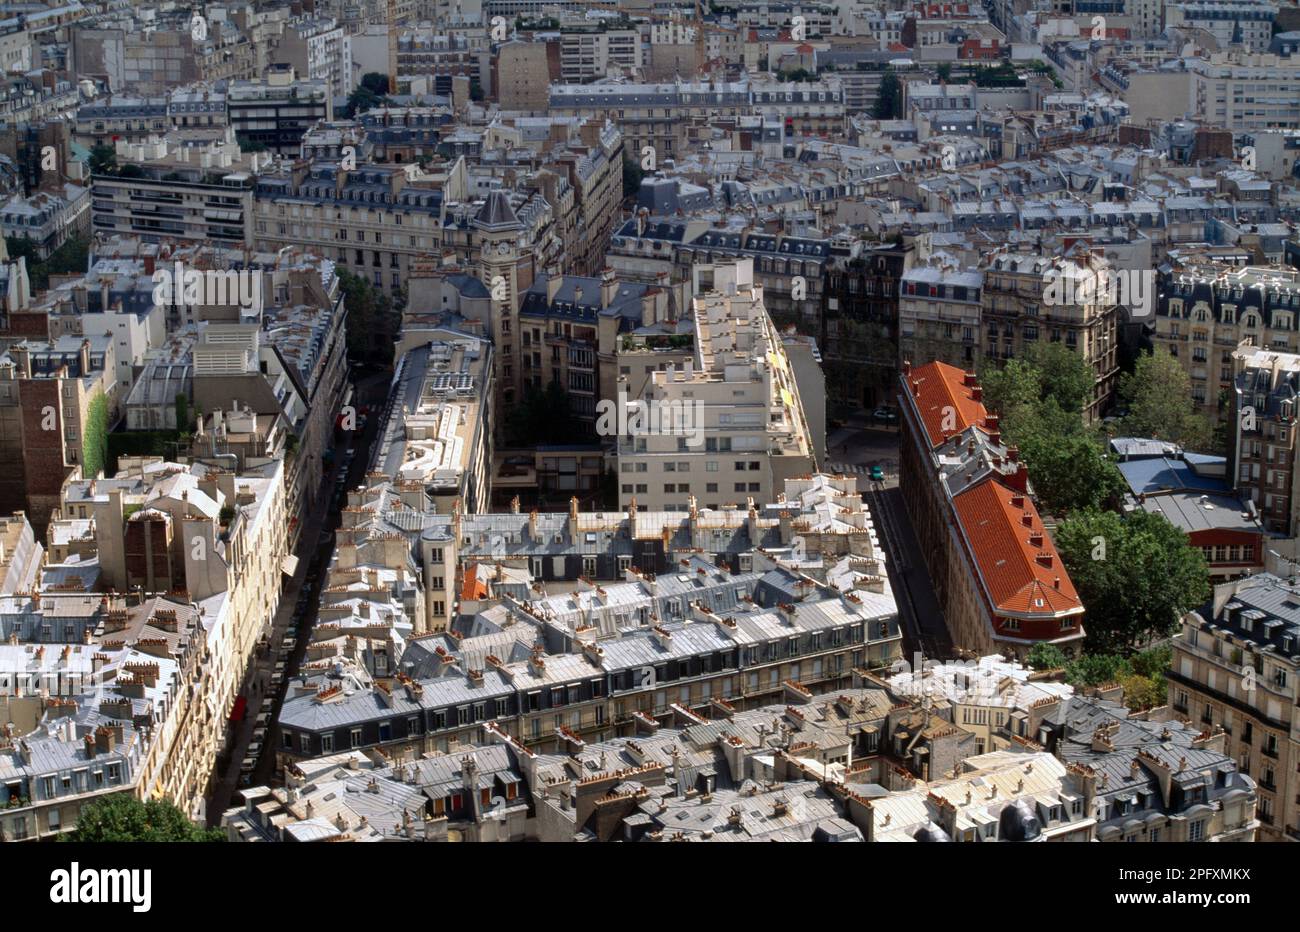 Paris France Aerial View From Eiffel Tower of Haussmann's Layout of Town Stock Photo